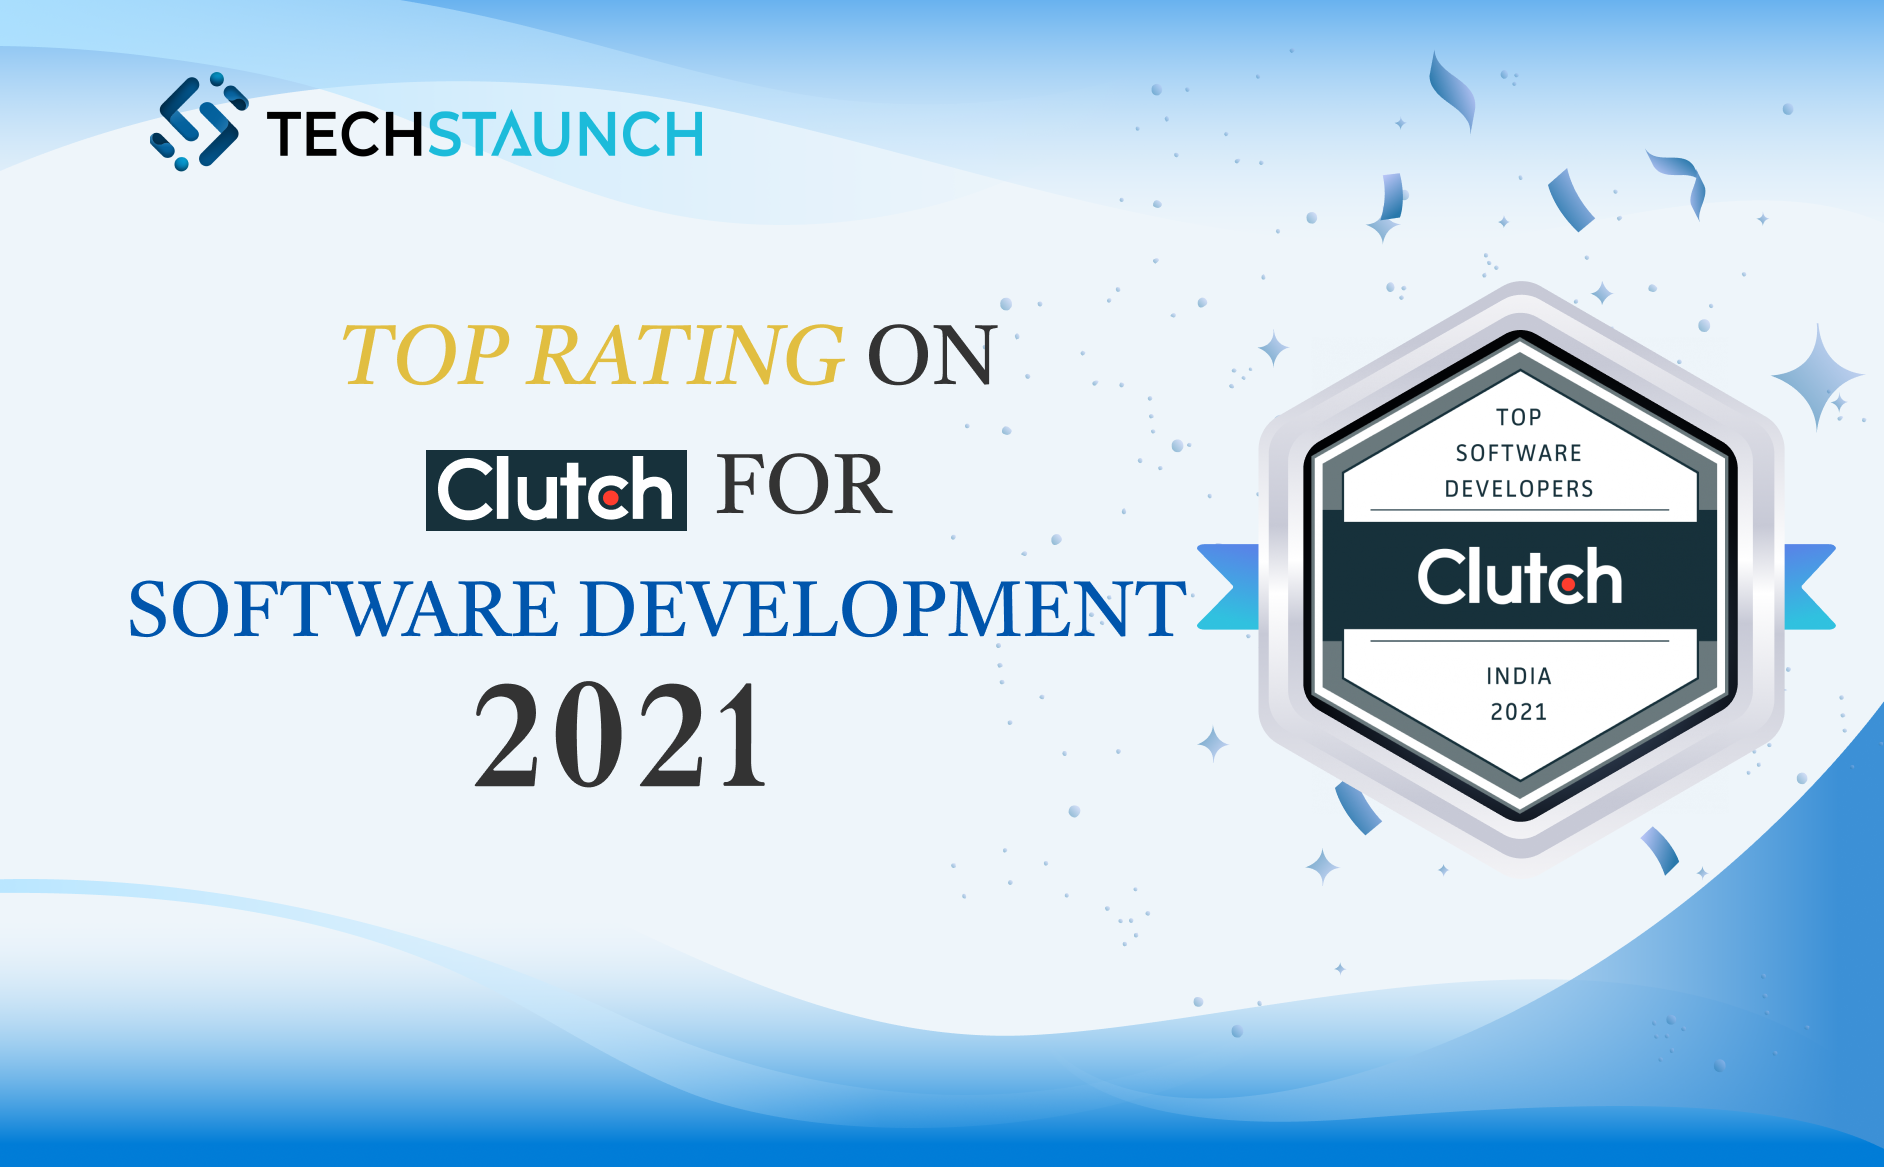 Action Speaks Louder than Words, Top Rating On Clutch for Software Development